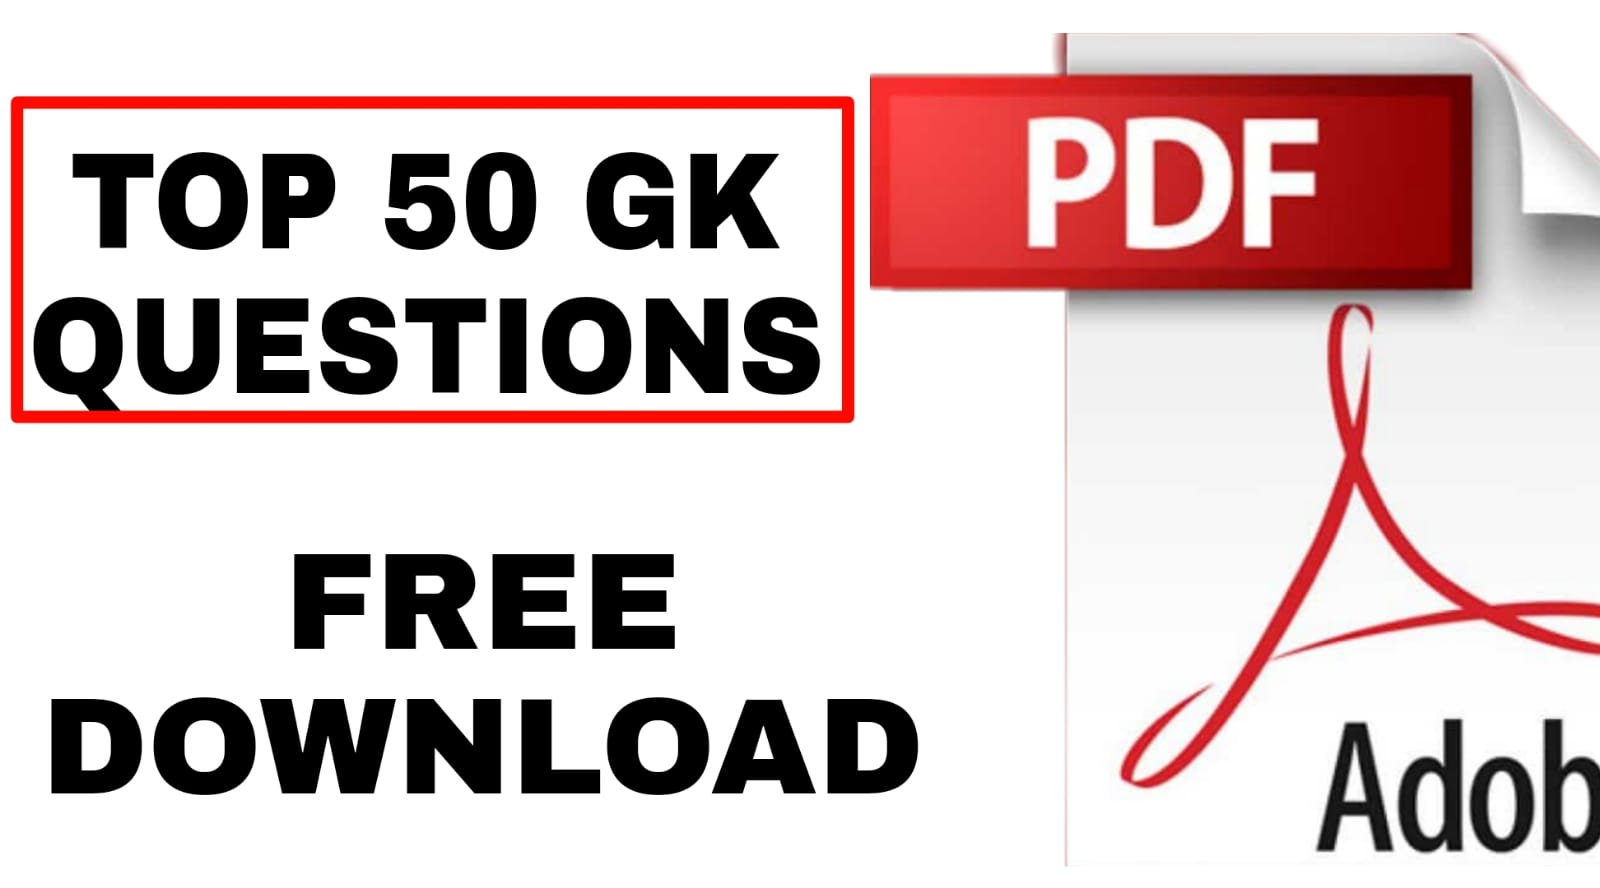 GK Top Important Questions and Answers